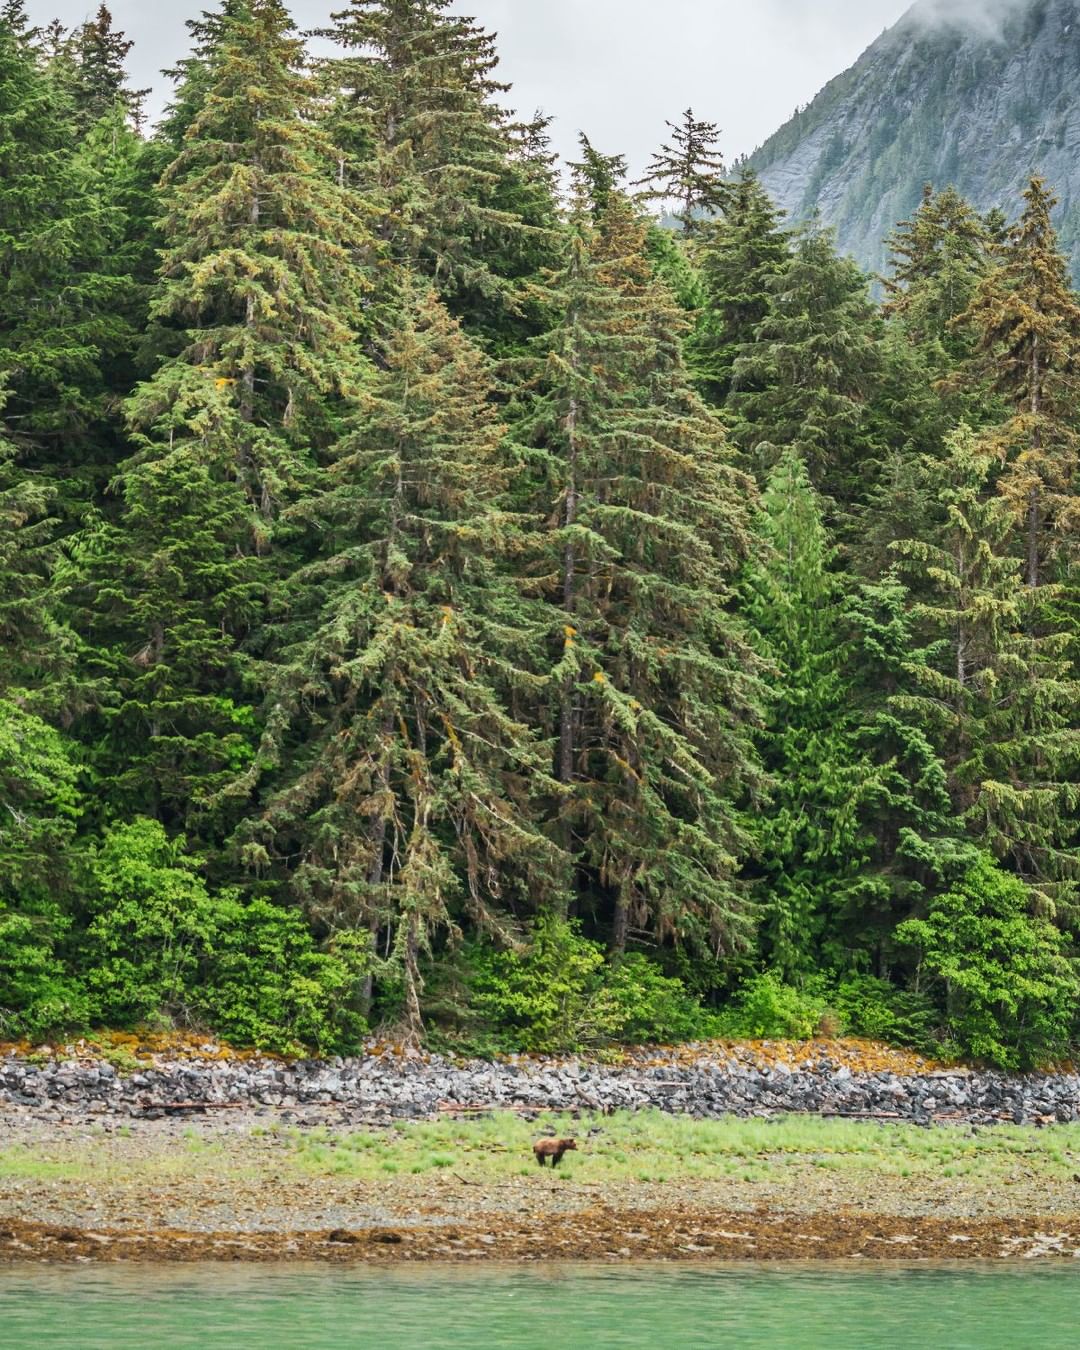 Magnificent conifer trees in the Great Bear Rainforest and at the edge of the treeline, a lone brown grizzly bear is visible in the distance